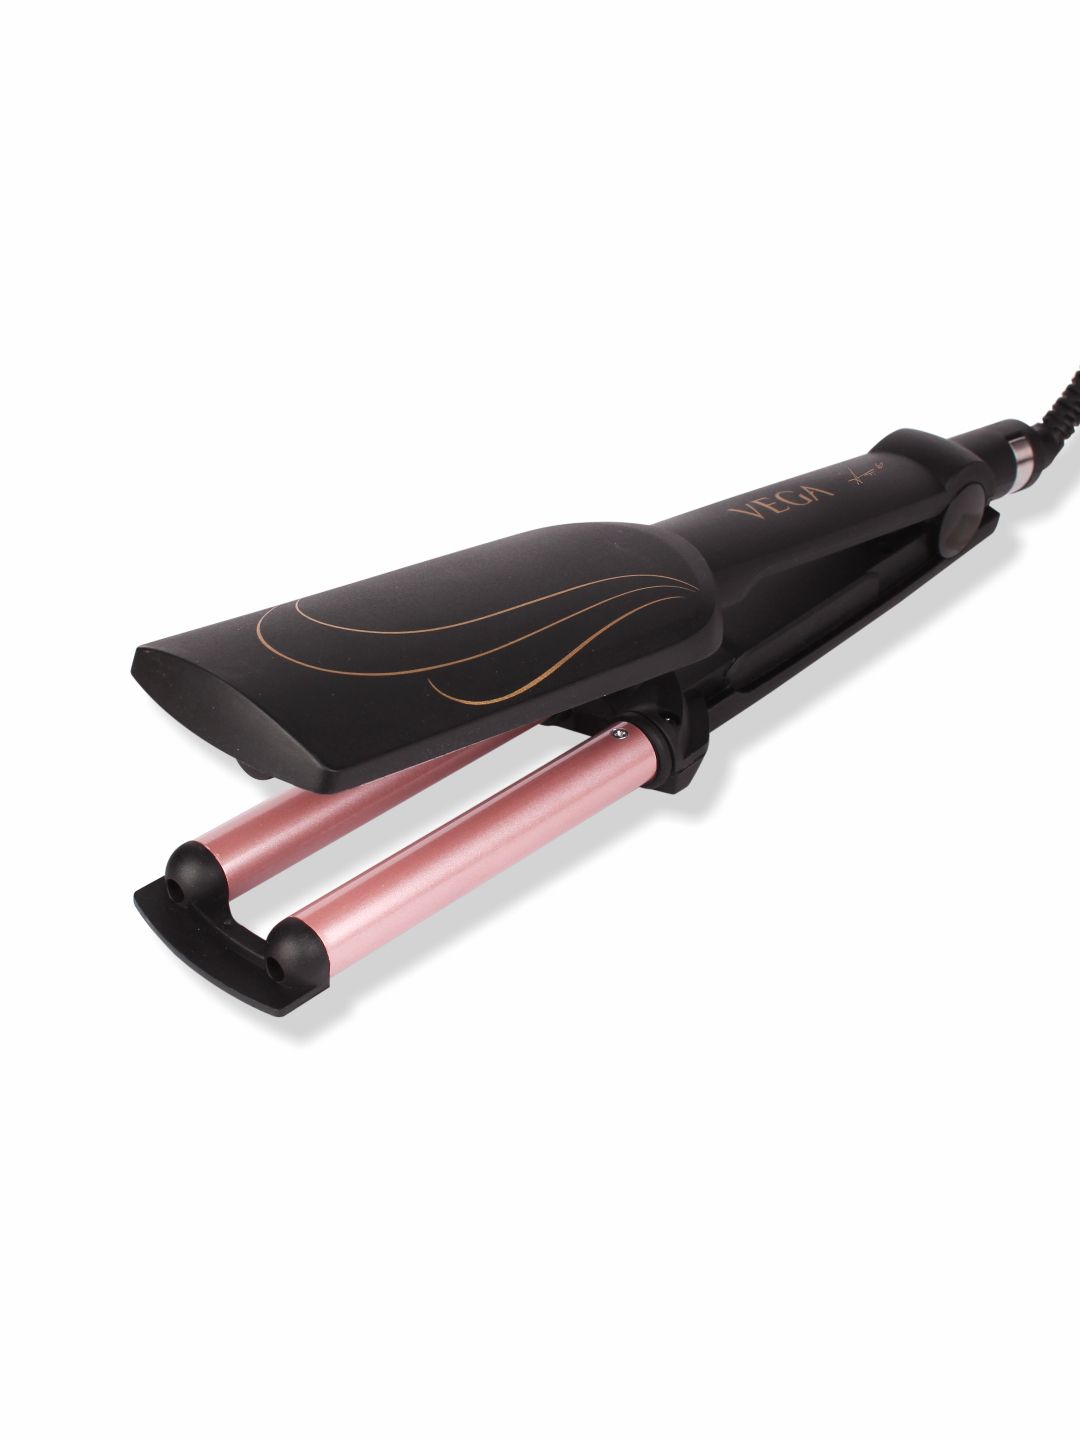 VEGA Ananya Panday Collection I-Wave Hair Waver VHWR-01 Price in India